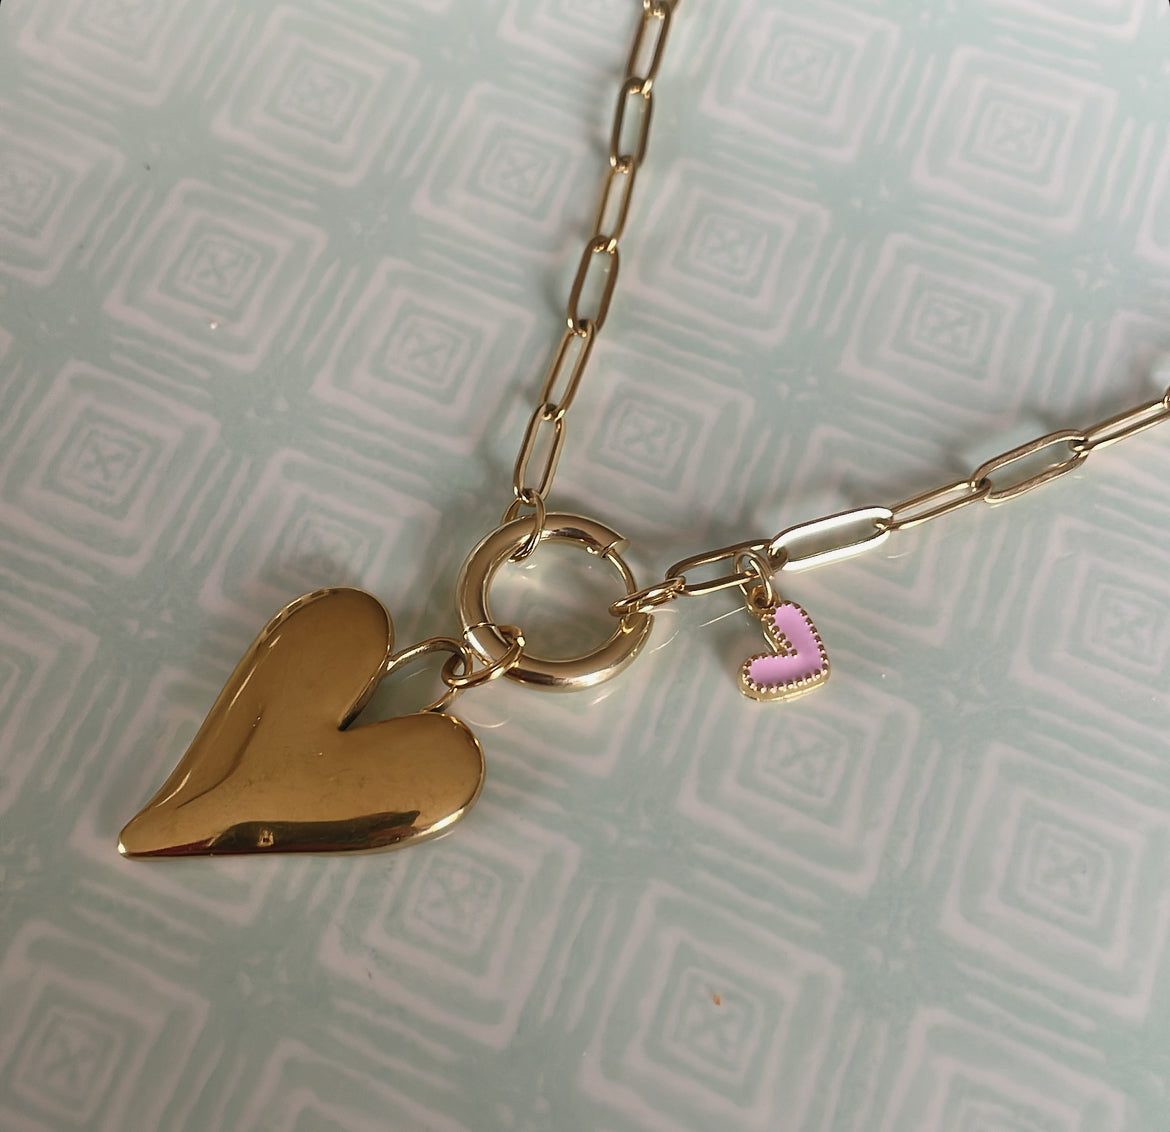 ‘COMBINED LOVE’ necklace